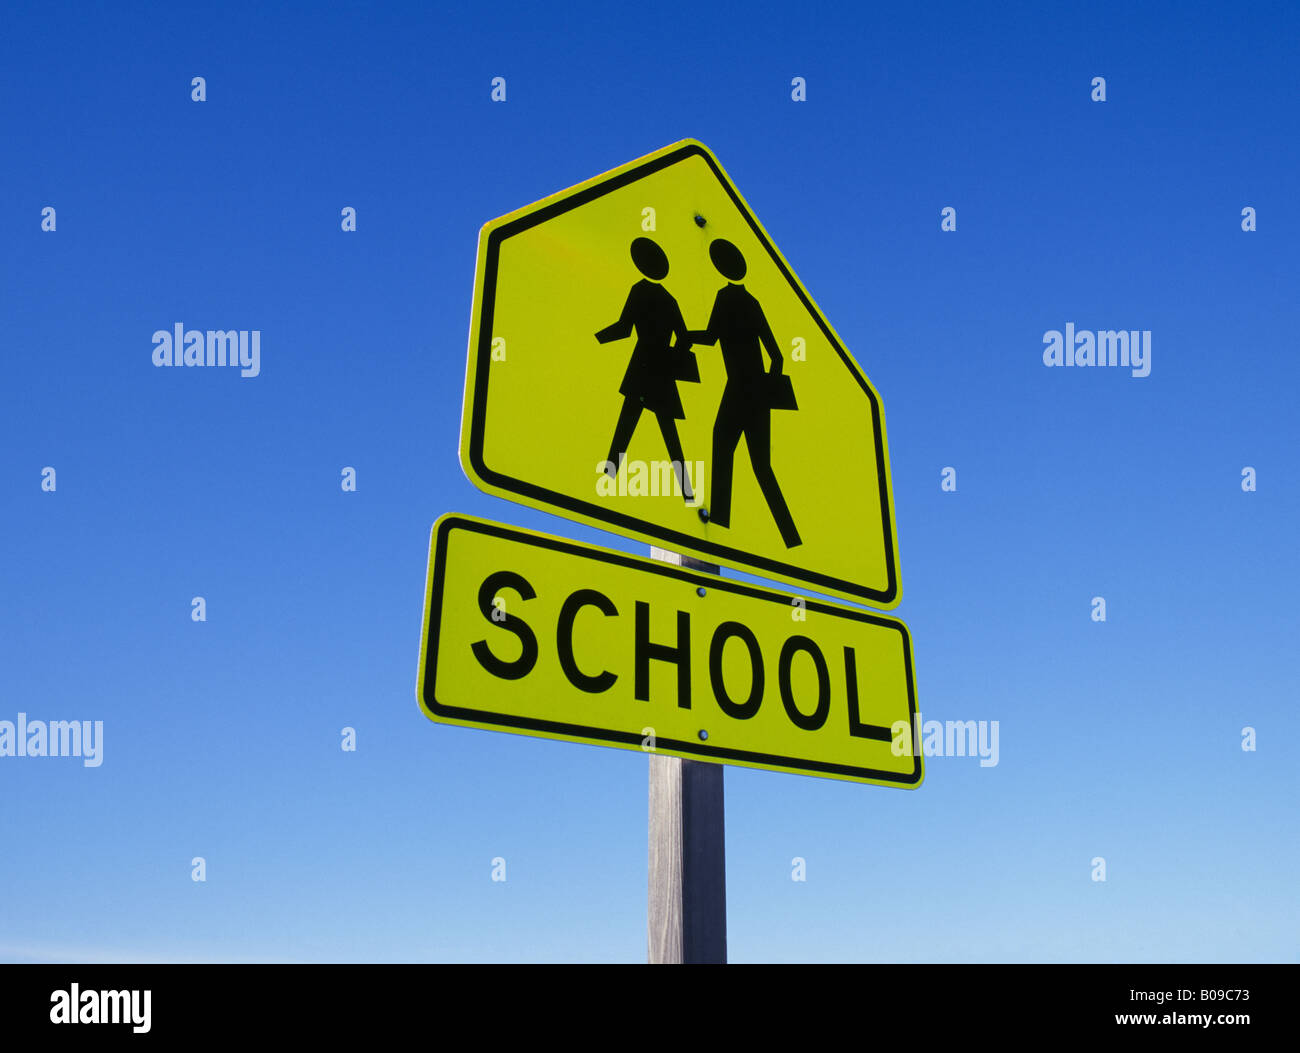 A school sign on a highway warns visitors to stop and yield to children crossing the road Stock Photo